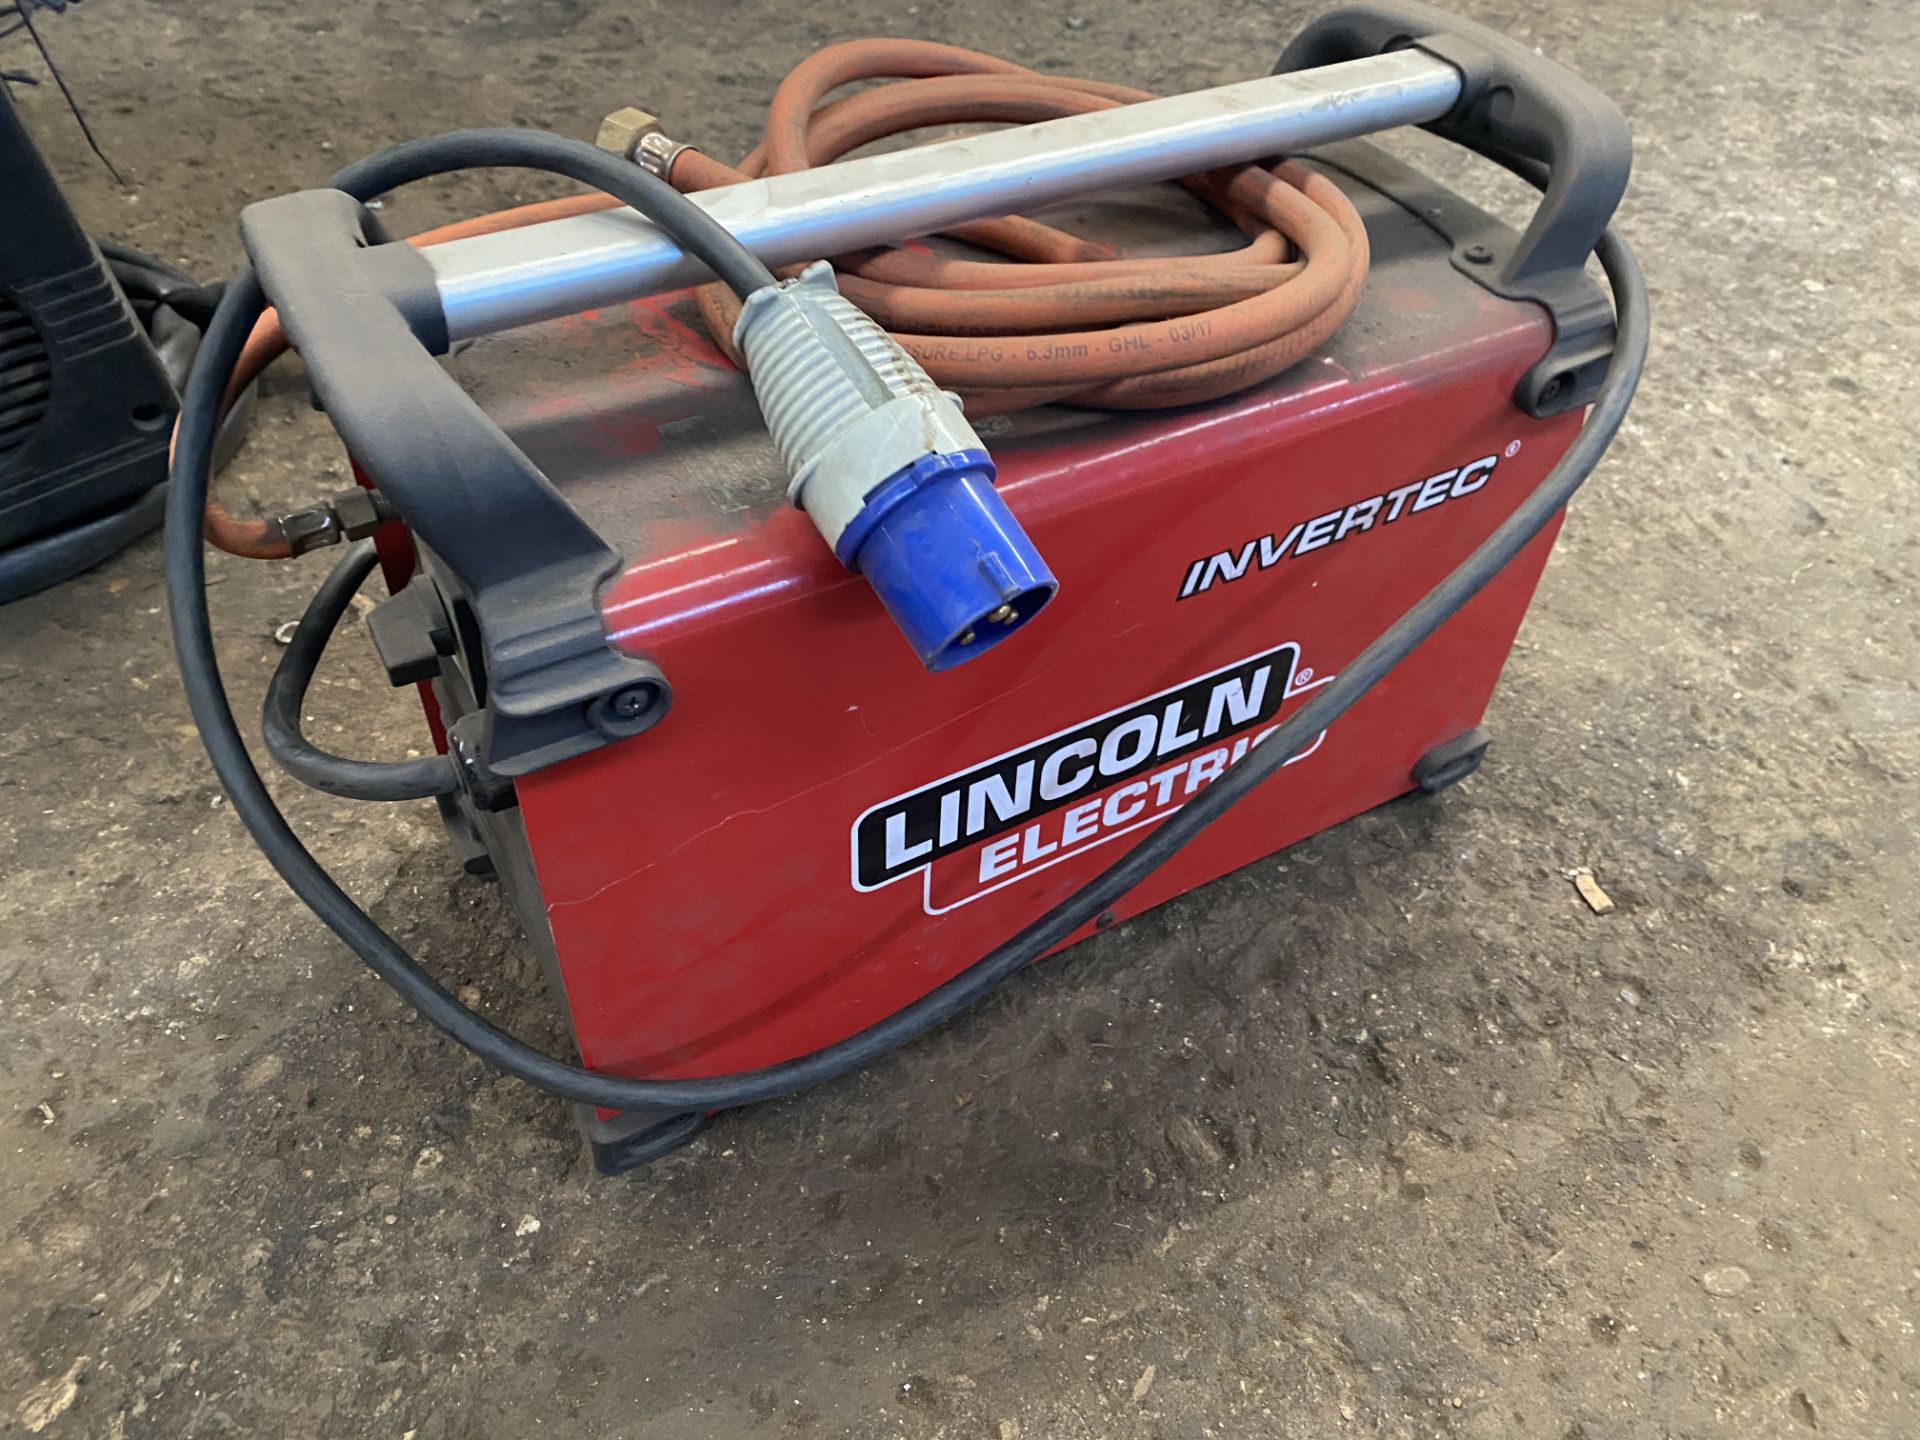 INVERTEC 170TX WELDER LINCOLN ELECTRIC - Image 2 of 3